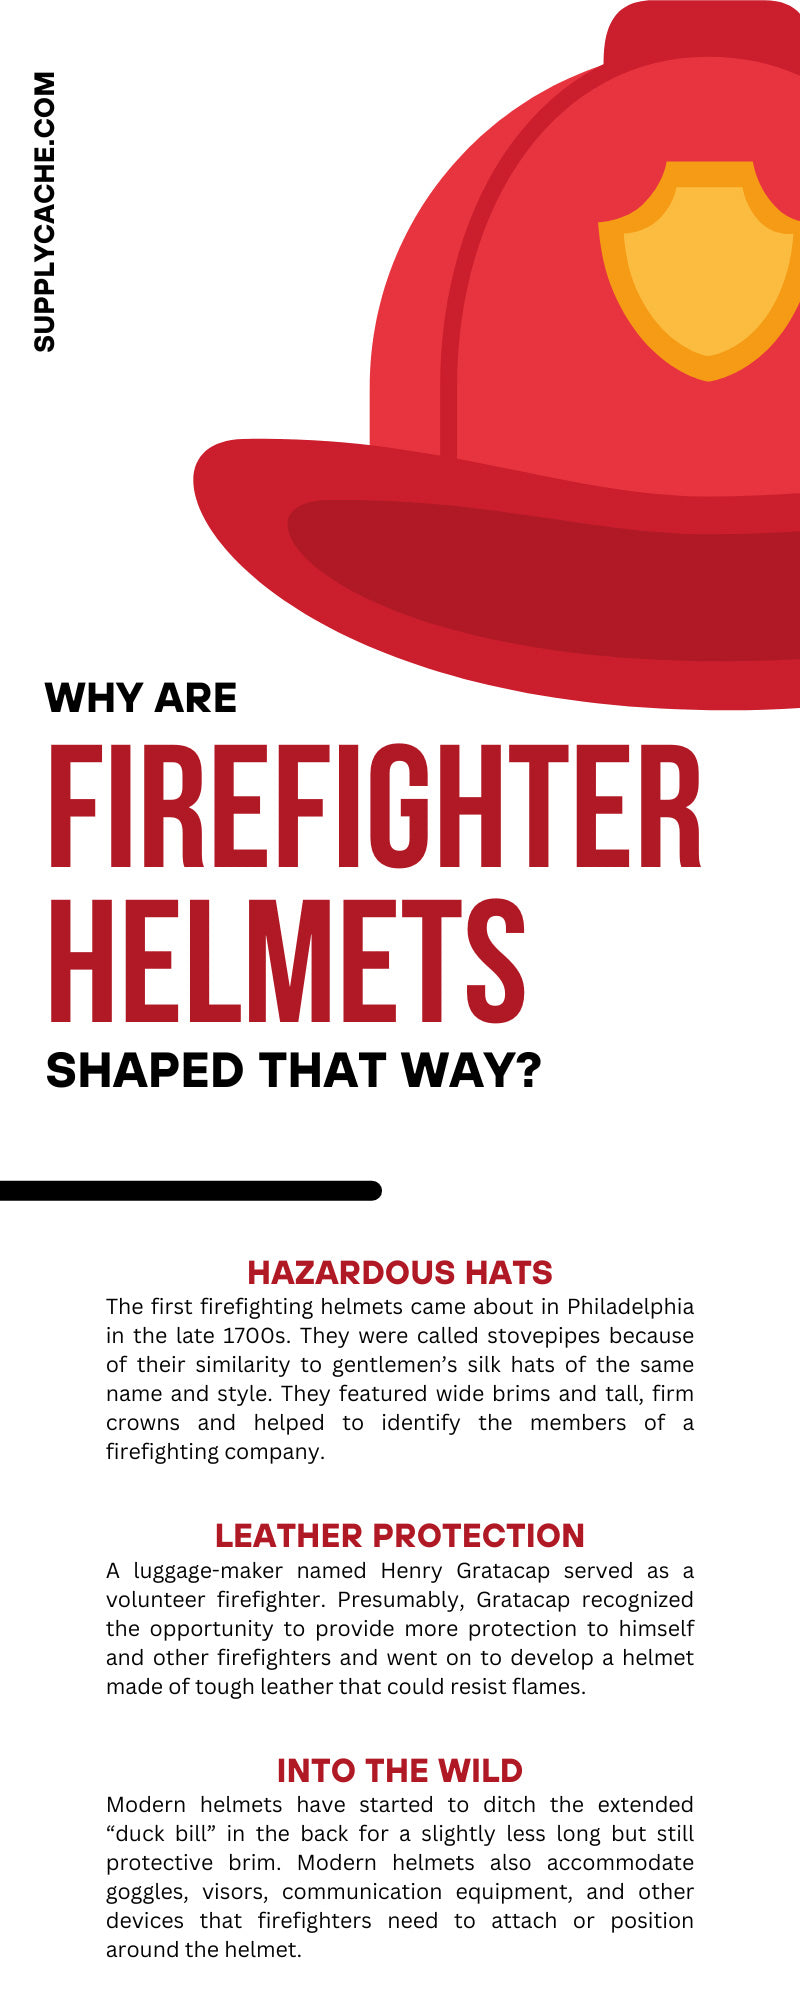 Why Are Firefighter Helmets Shaped That Way?